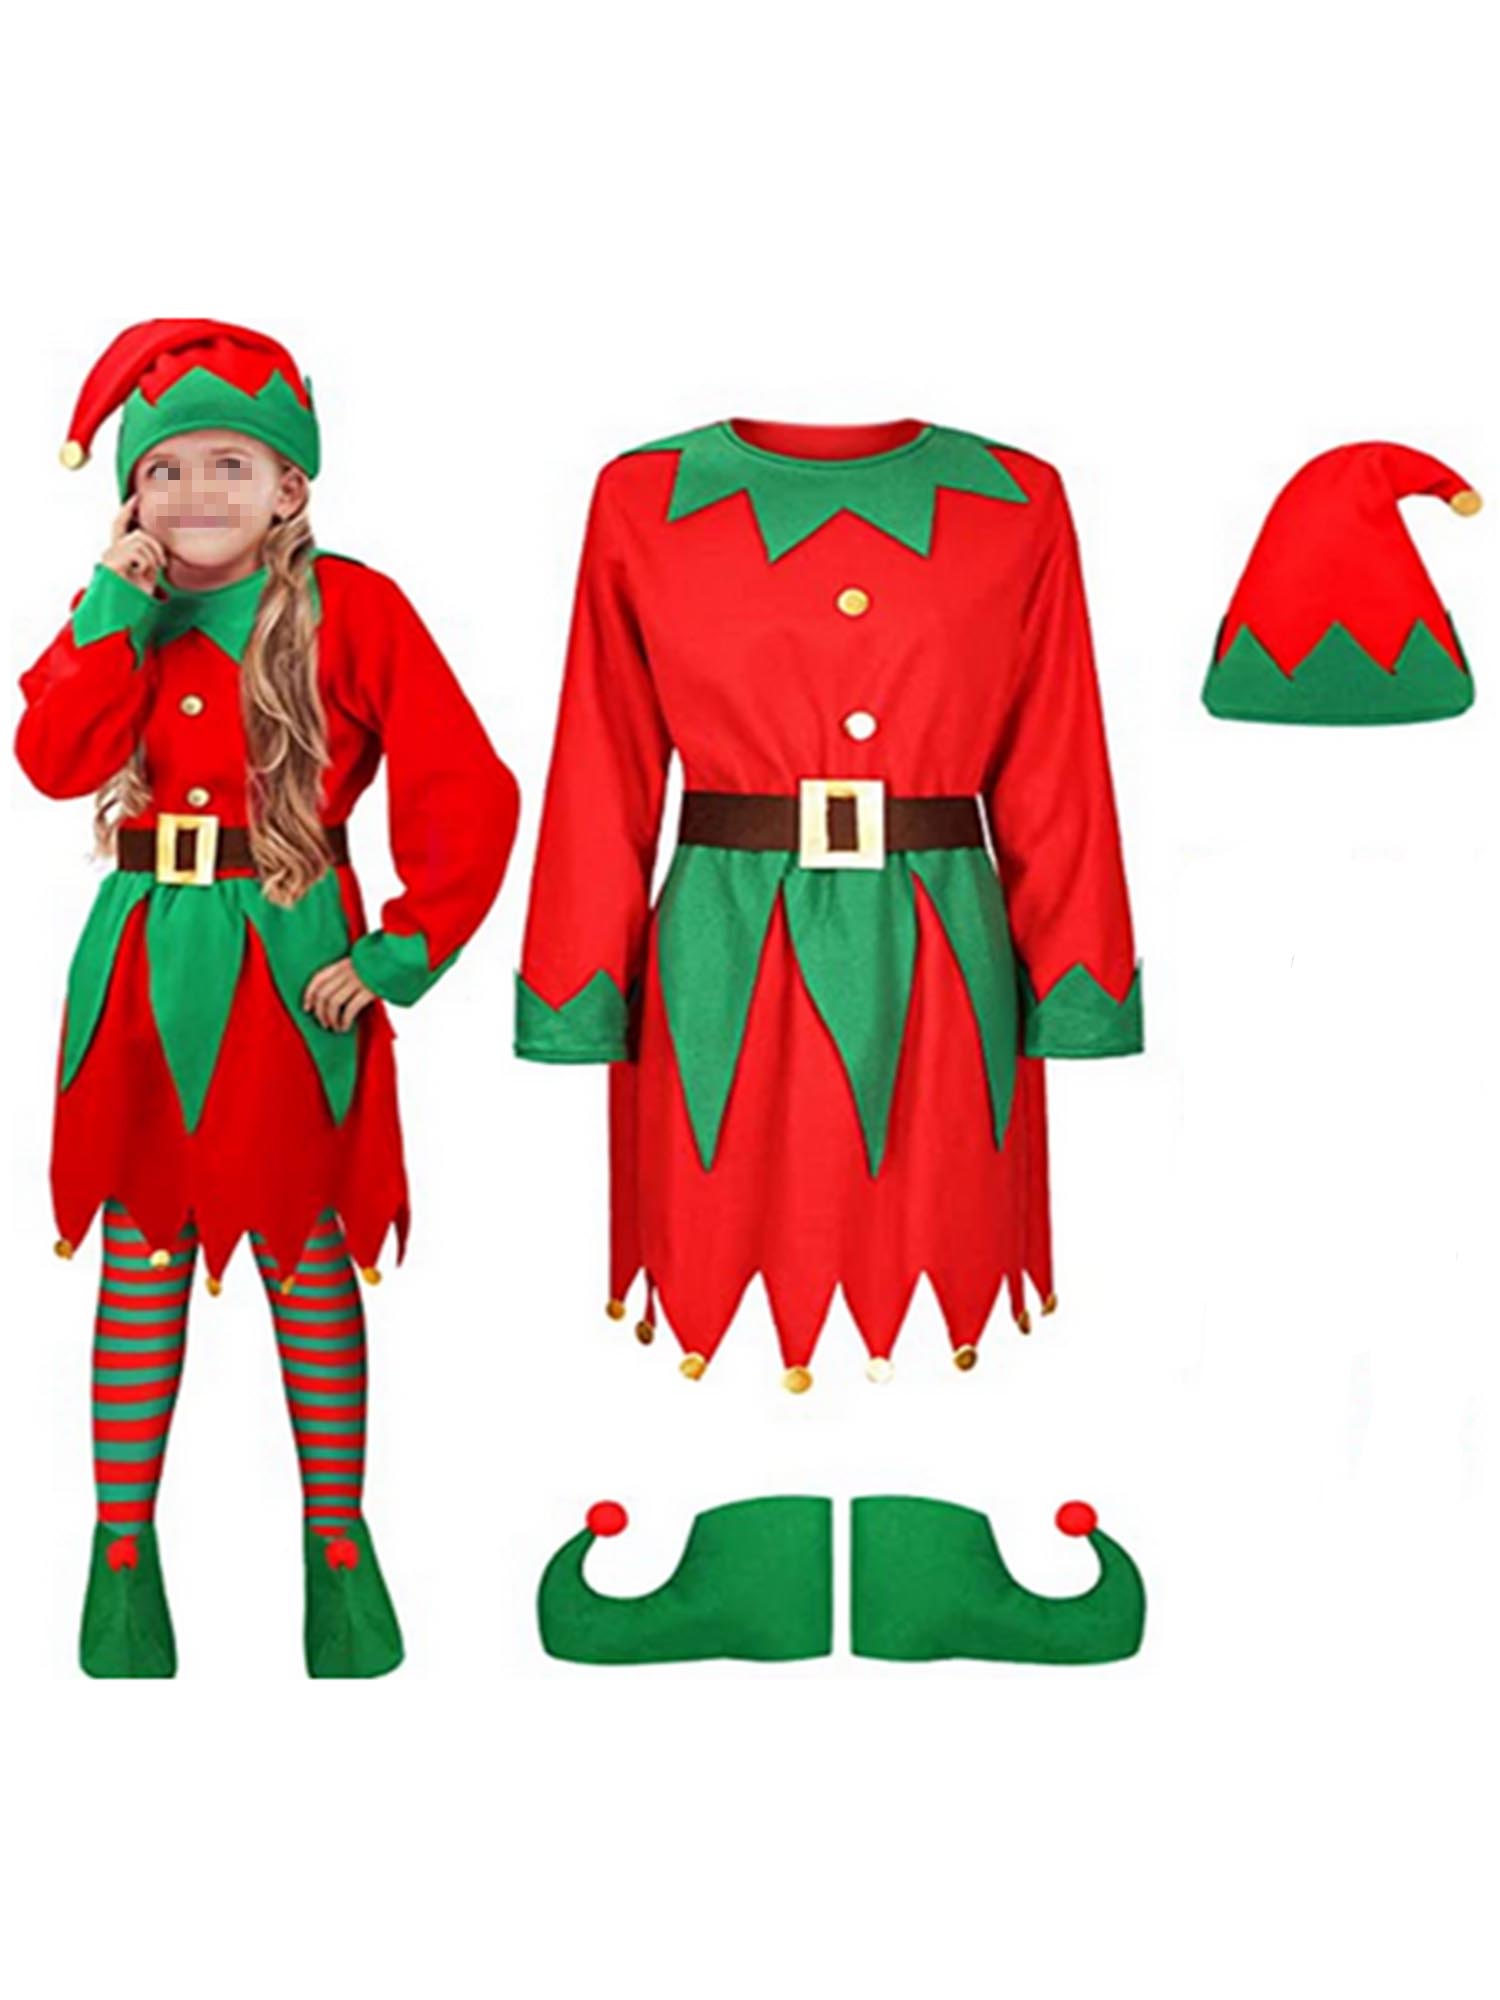 Christmas Cosplay Costume for Women Girl Elf Dress With Belt Hat Shoes Gift New Year Carnival Party Costume - image 1 of 5